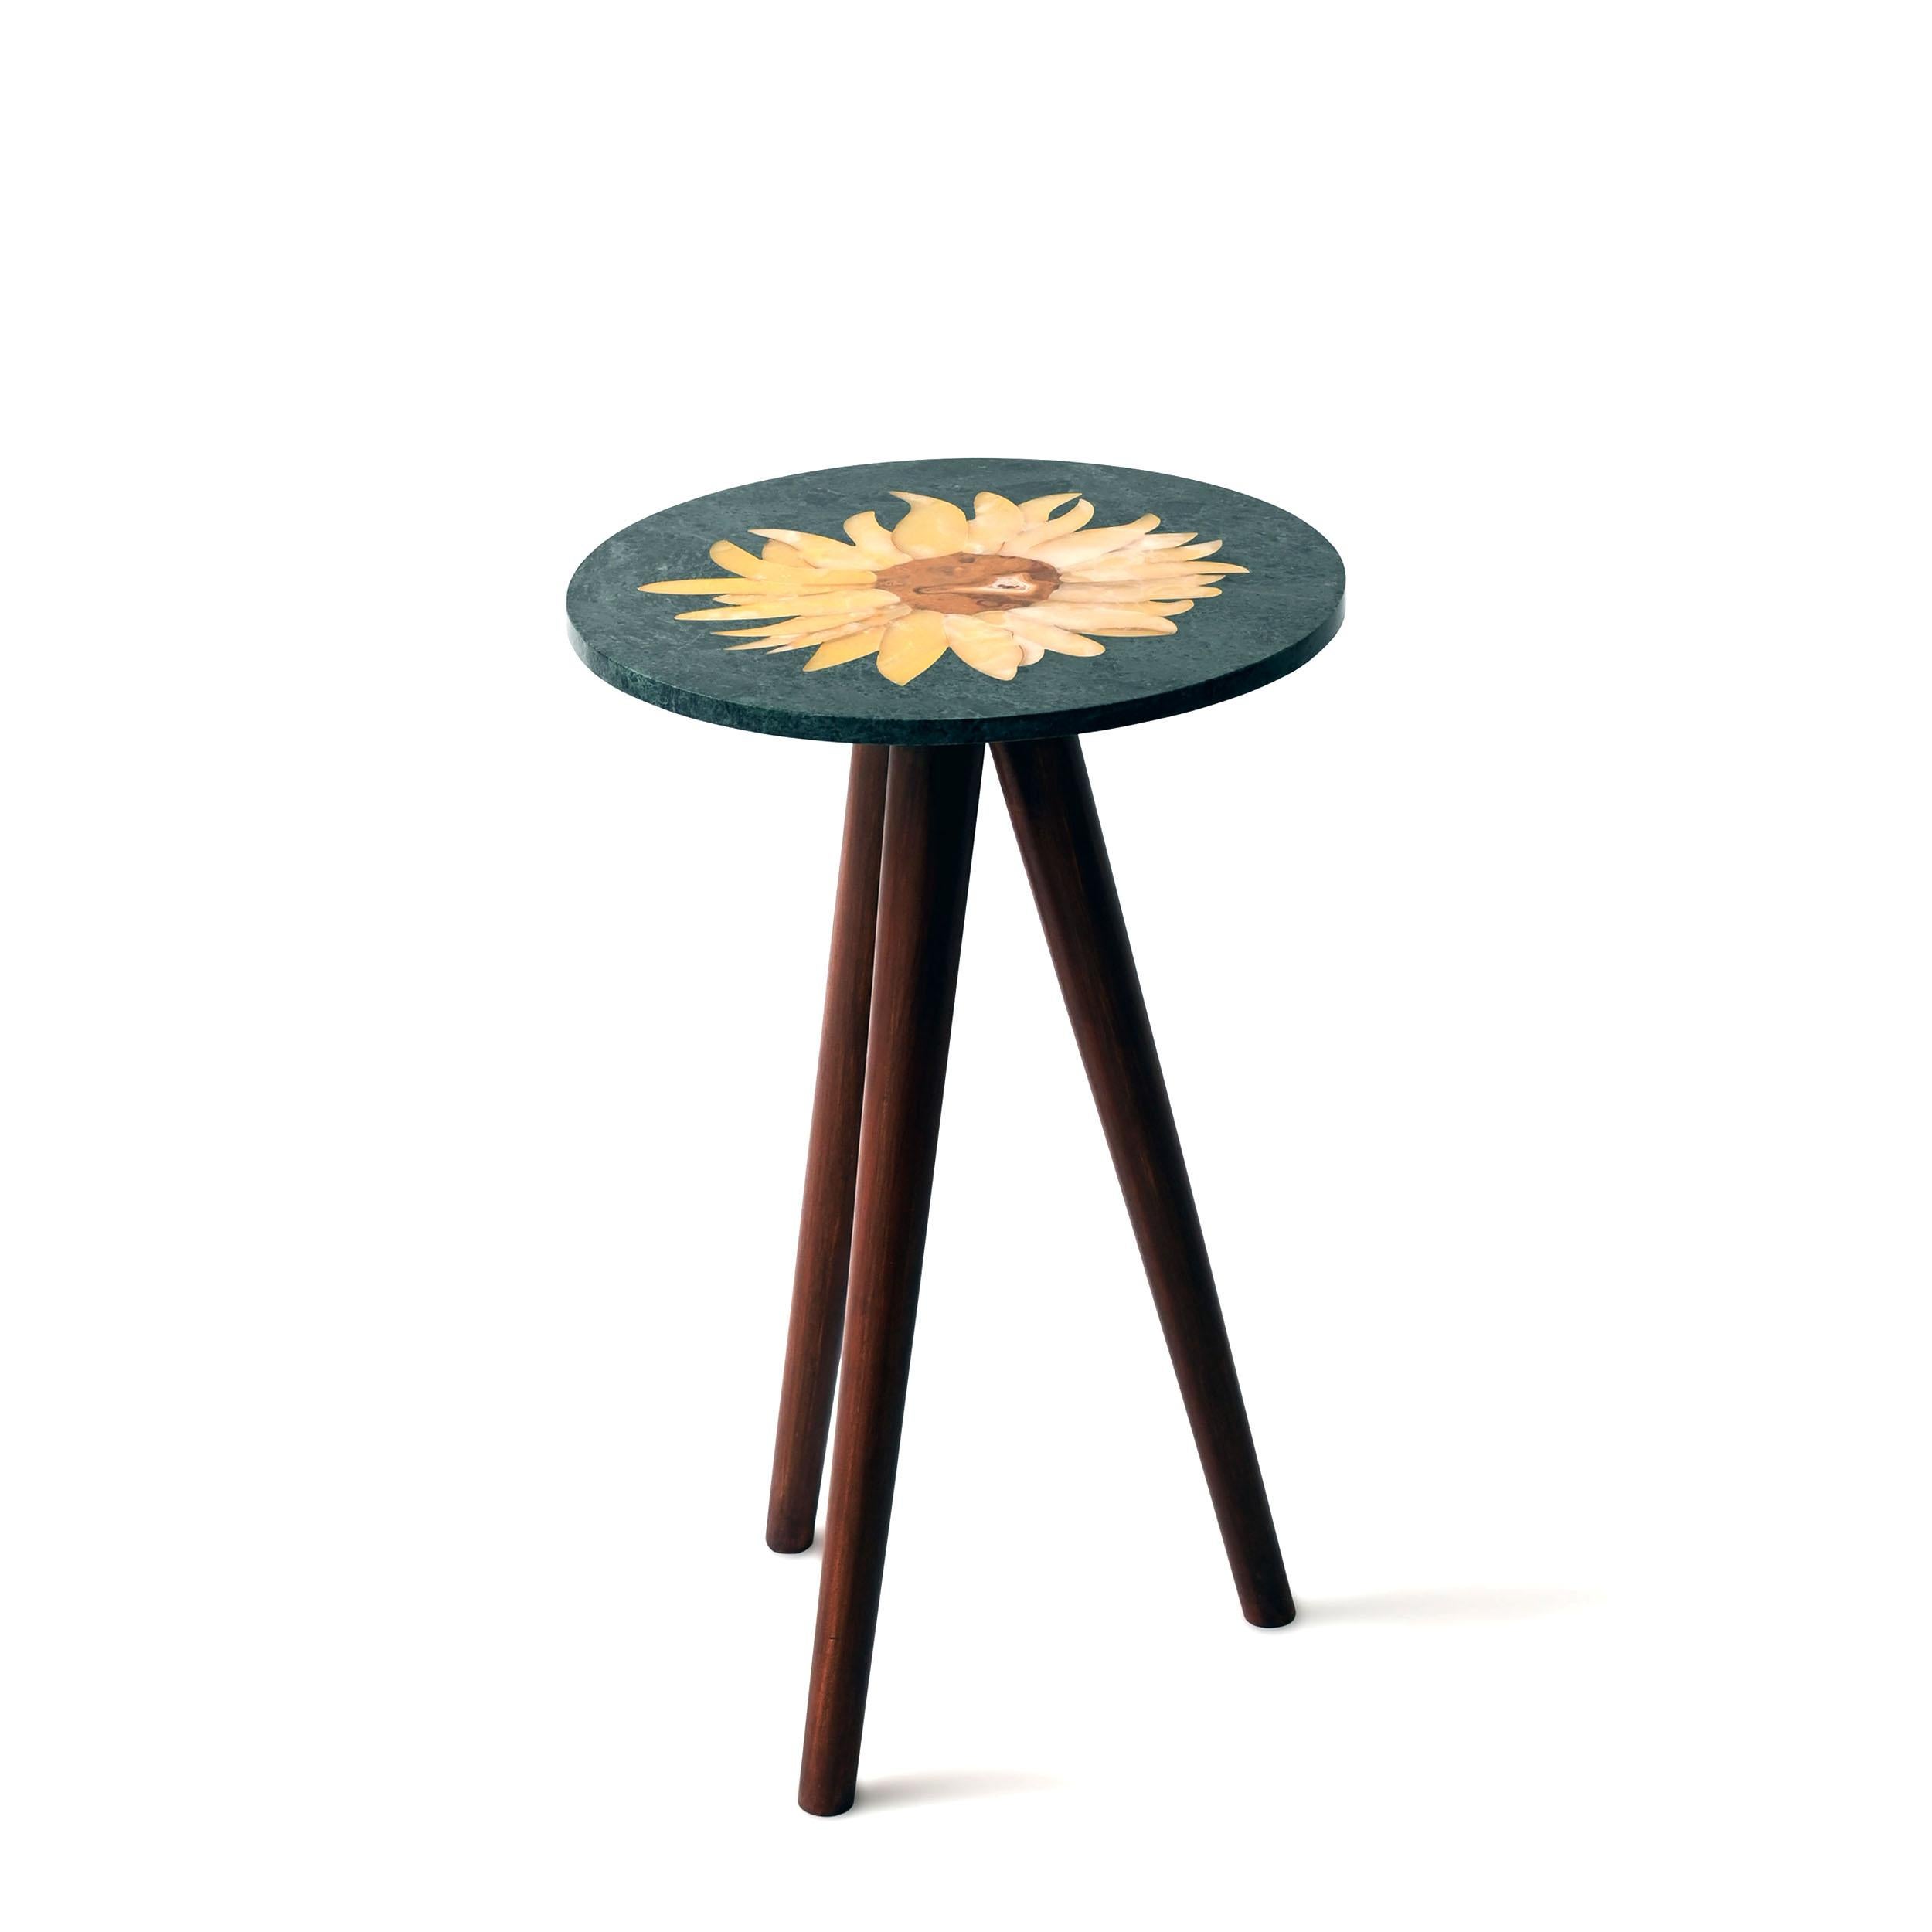 Arles side table I by Studio Lel
Dimensions: D 40.6 x W 40.6 x H 71 cm.
Materials: Onyx, marble, wood

Handcrafted from semiprecious stone and marble in a small artisanal workshop. Please note that variations and slight imperfections are part of